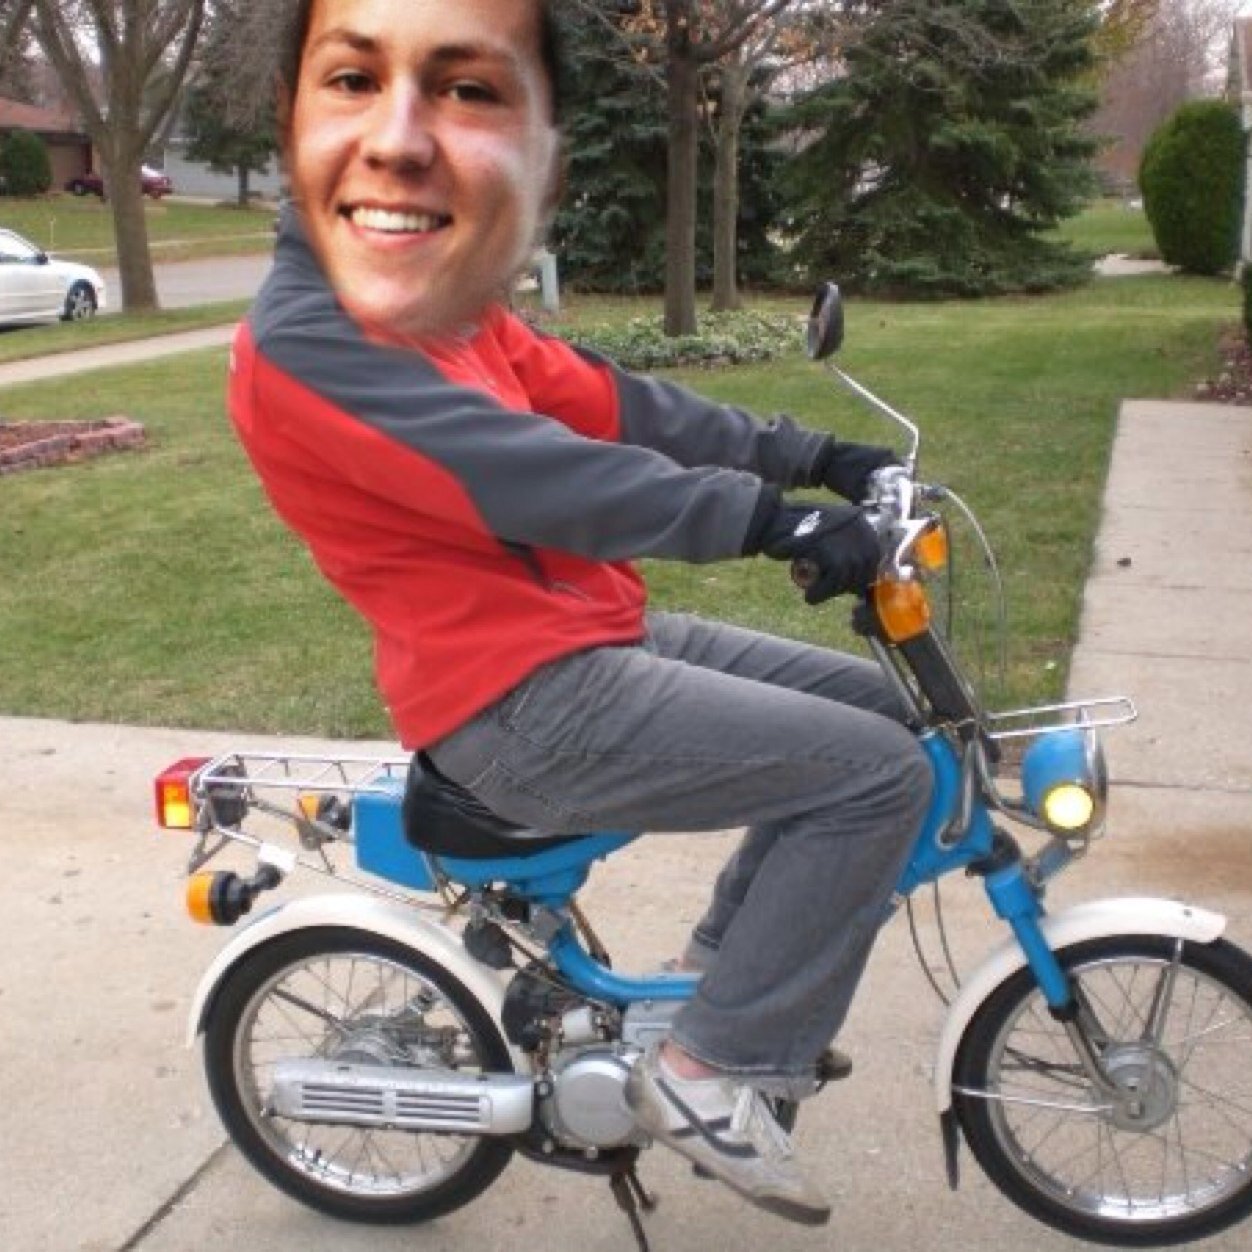 Banochuliski is the name and driving to subway on my mopeds the game #mopedgrind